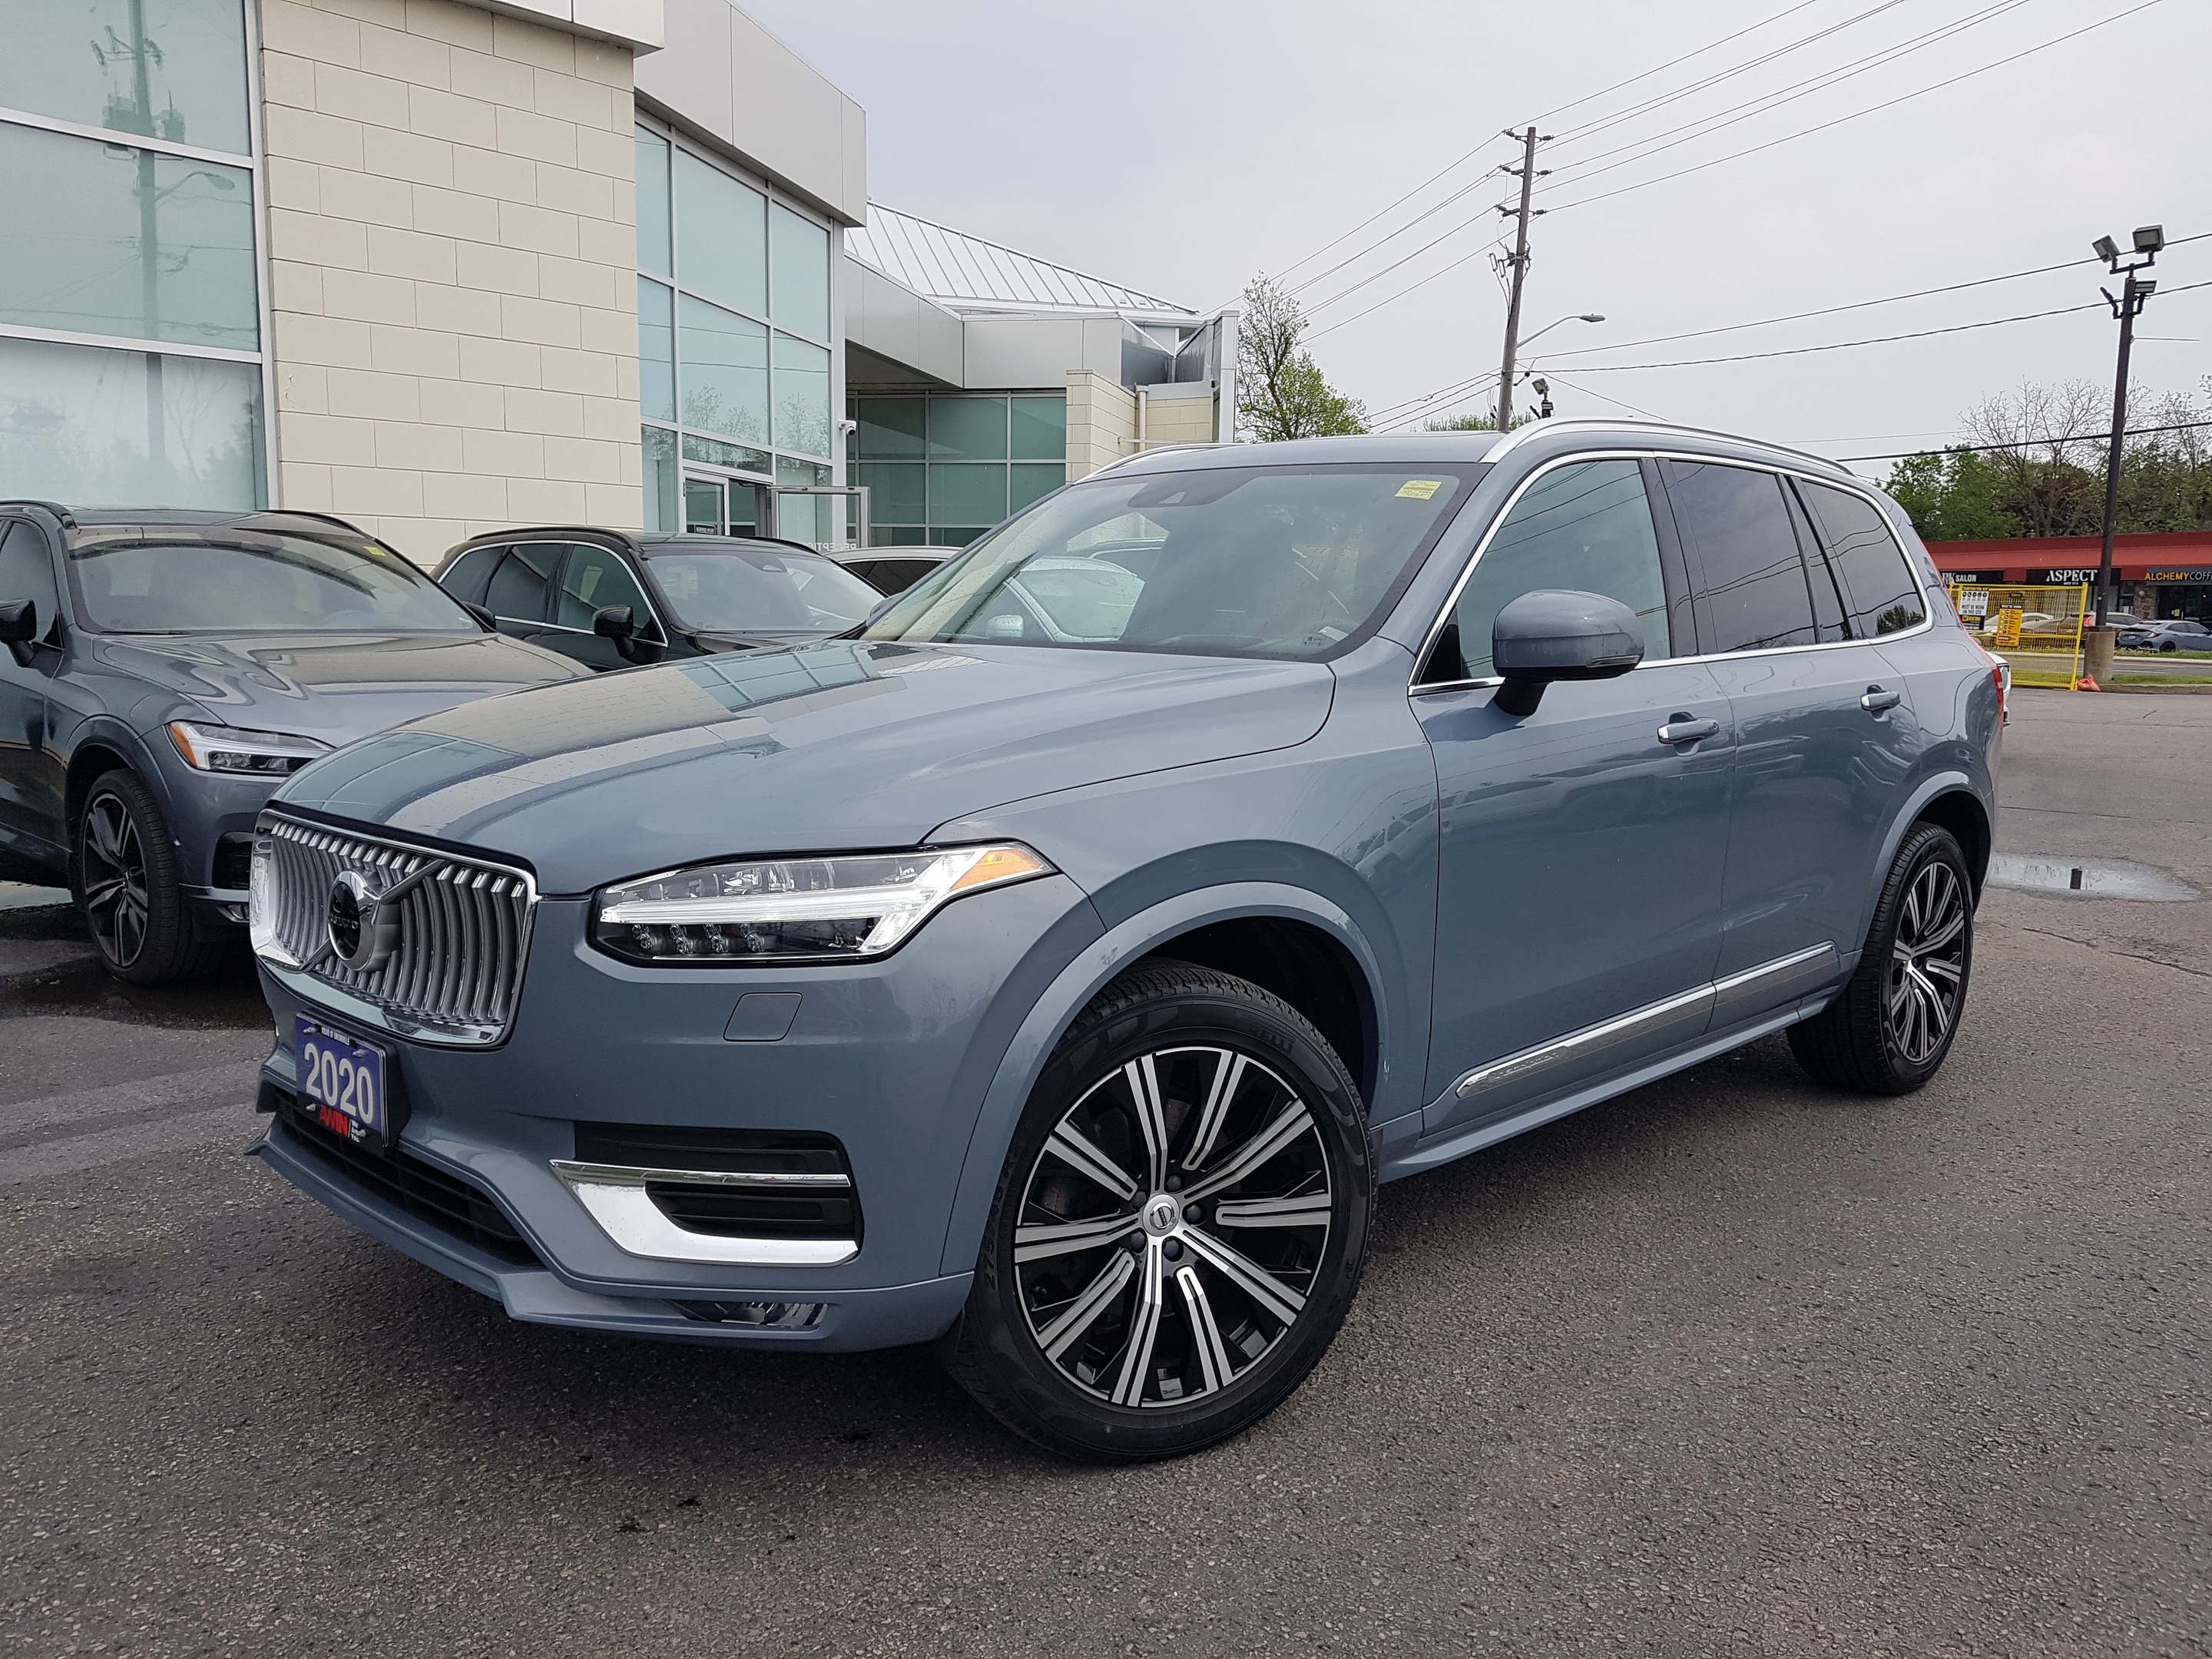 2020 Volvo XC90 T6 AWD Inscription (7-Seat) |CPO|MAY SPECIAL|